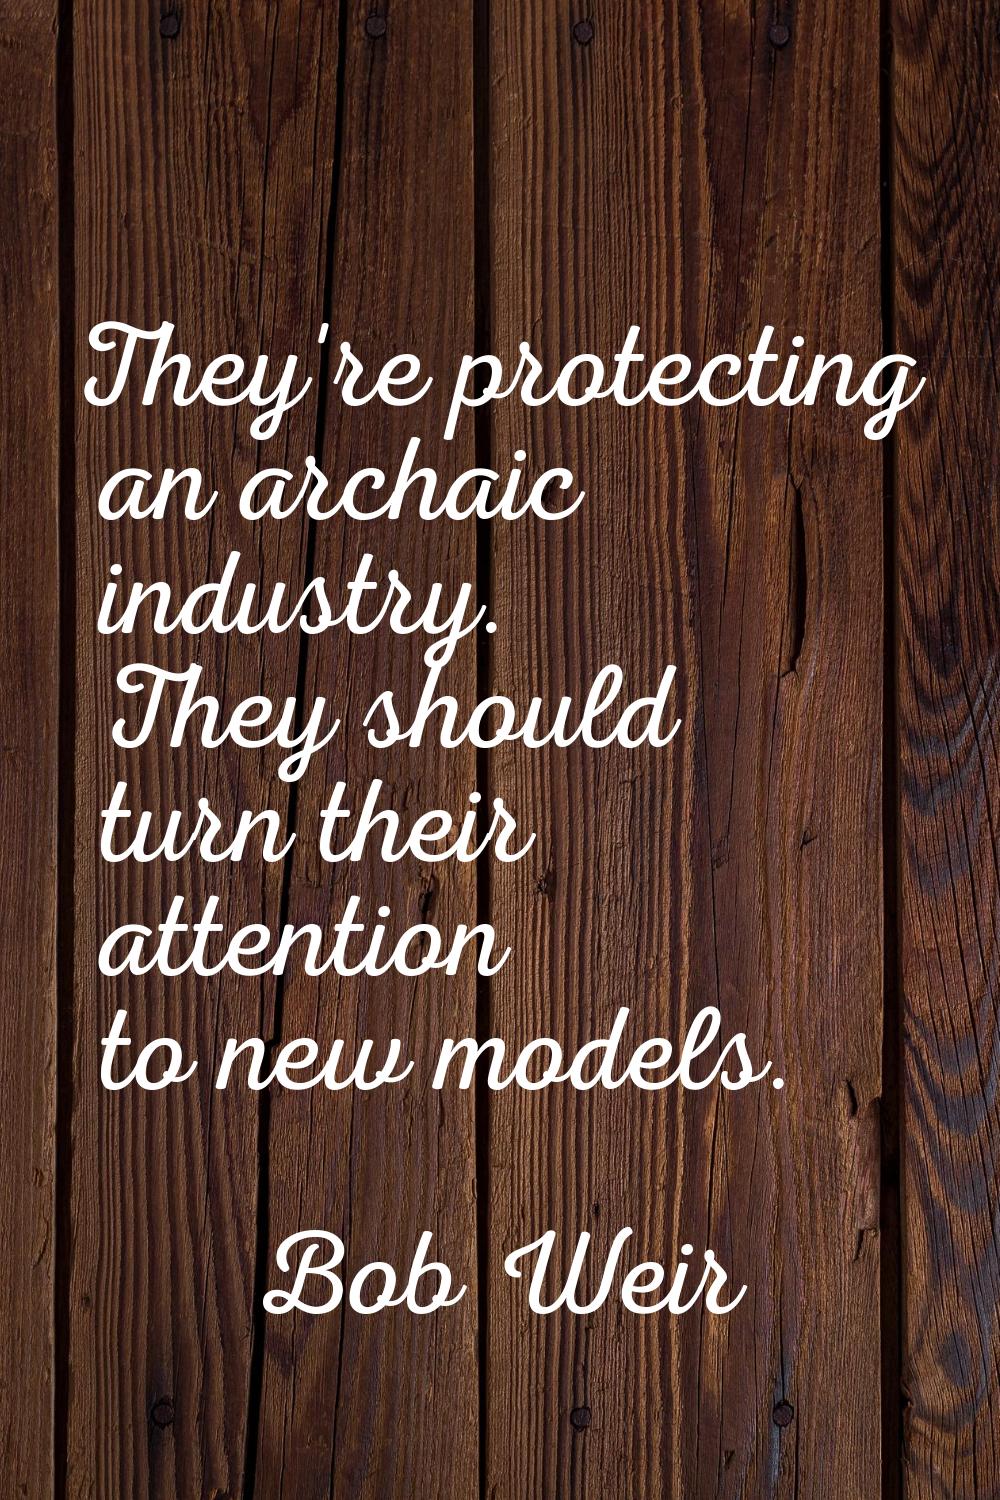 They're protecting an archaic industry. They should turn their attention to new models.